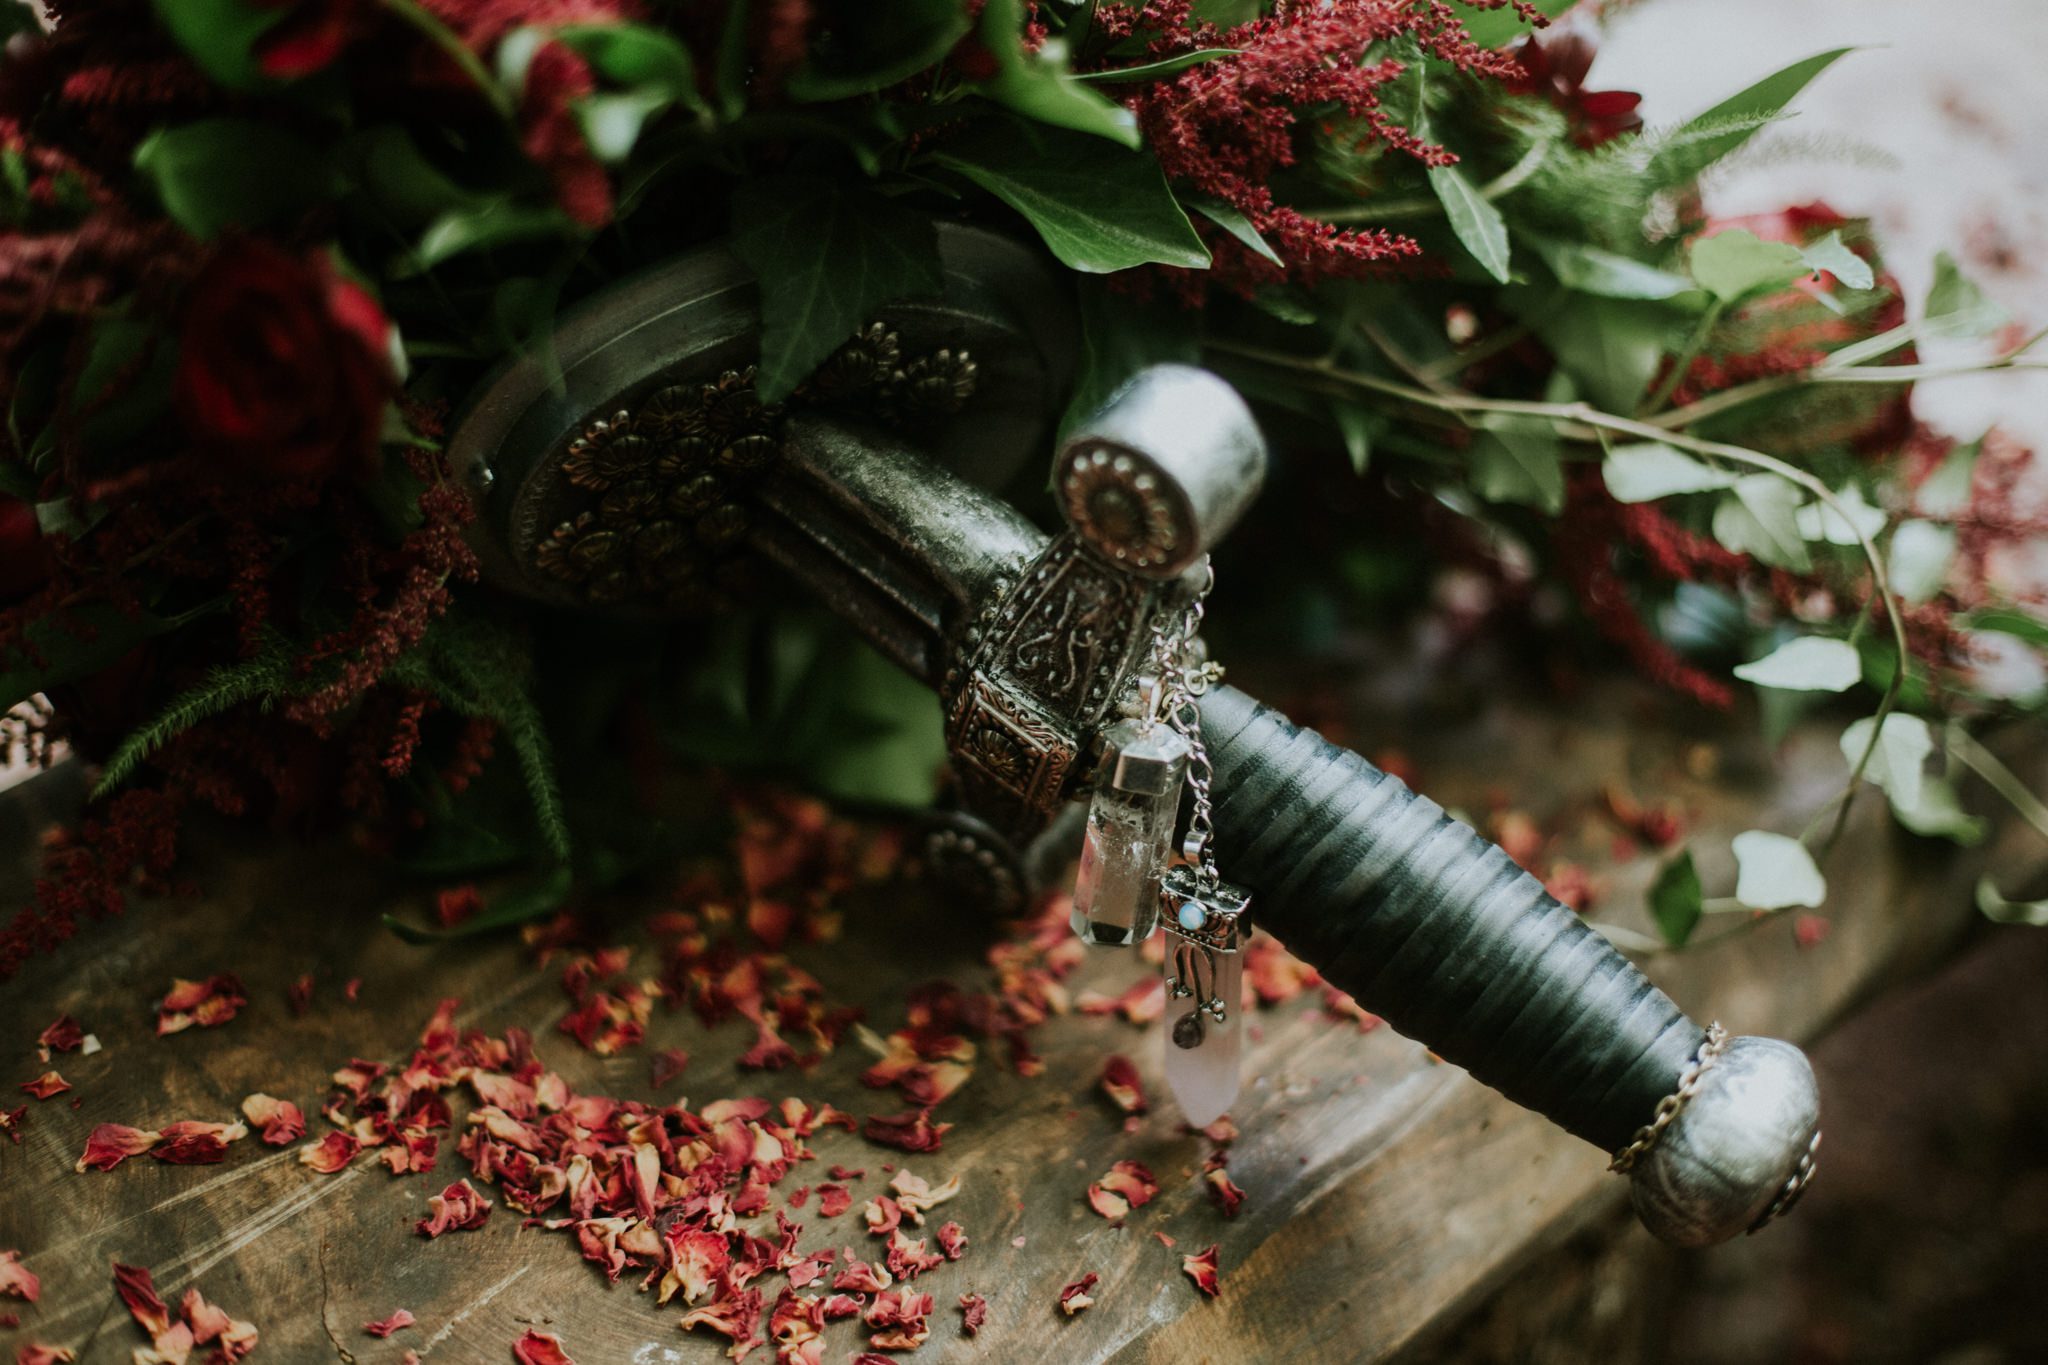 The pommel of a sword is using in a bridal bouquet